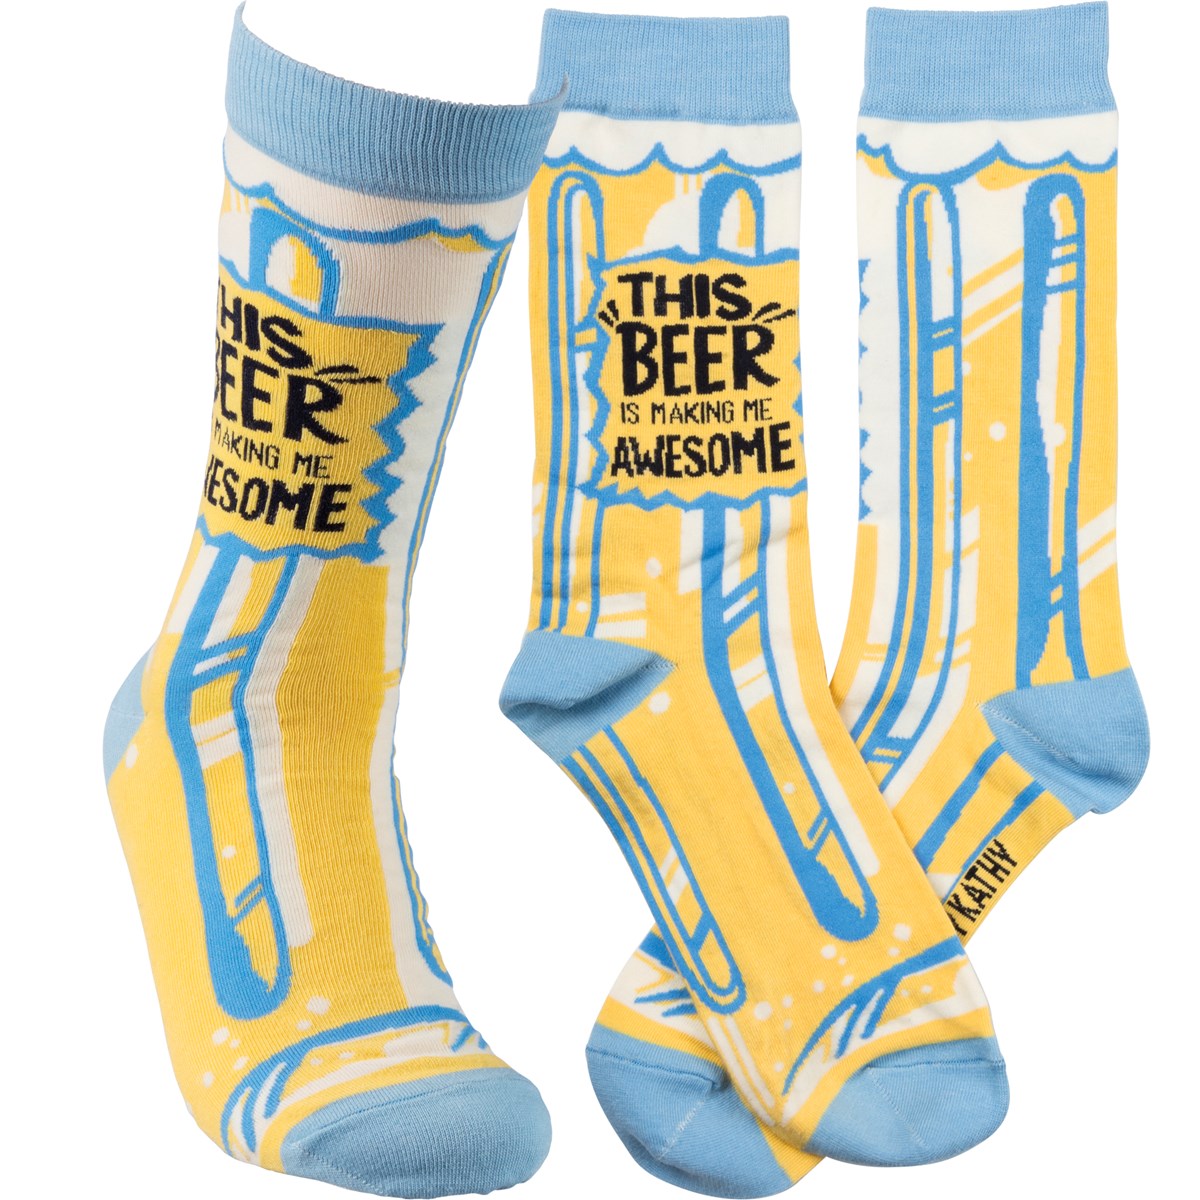 Socks - This Beer Is  Making Me Awesome - One Size Fits Most - Cotton, Nylon, Spandex